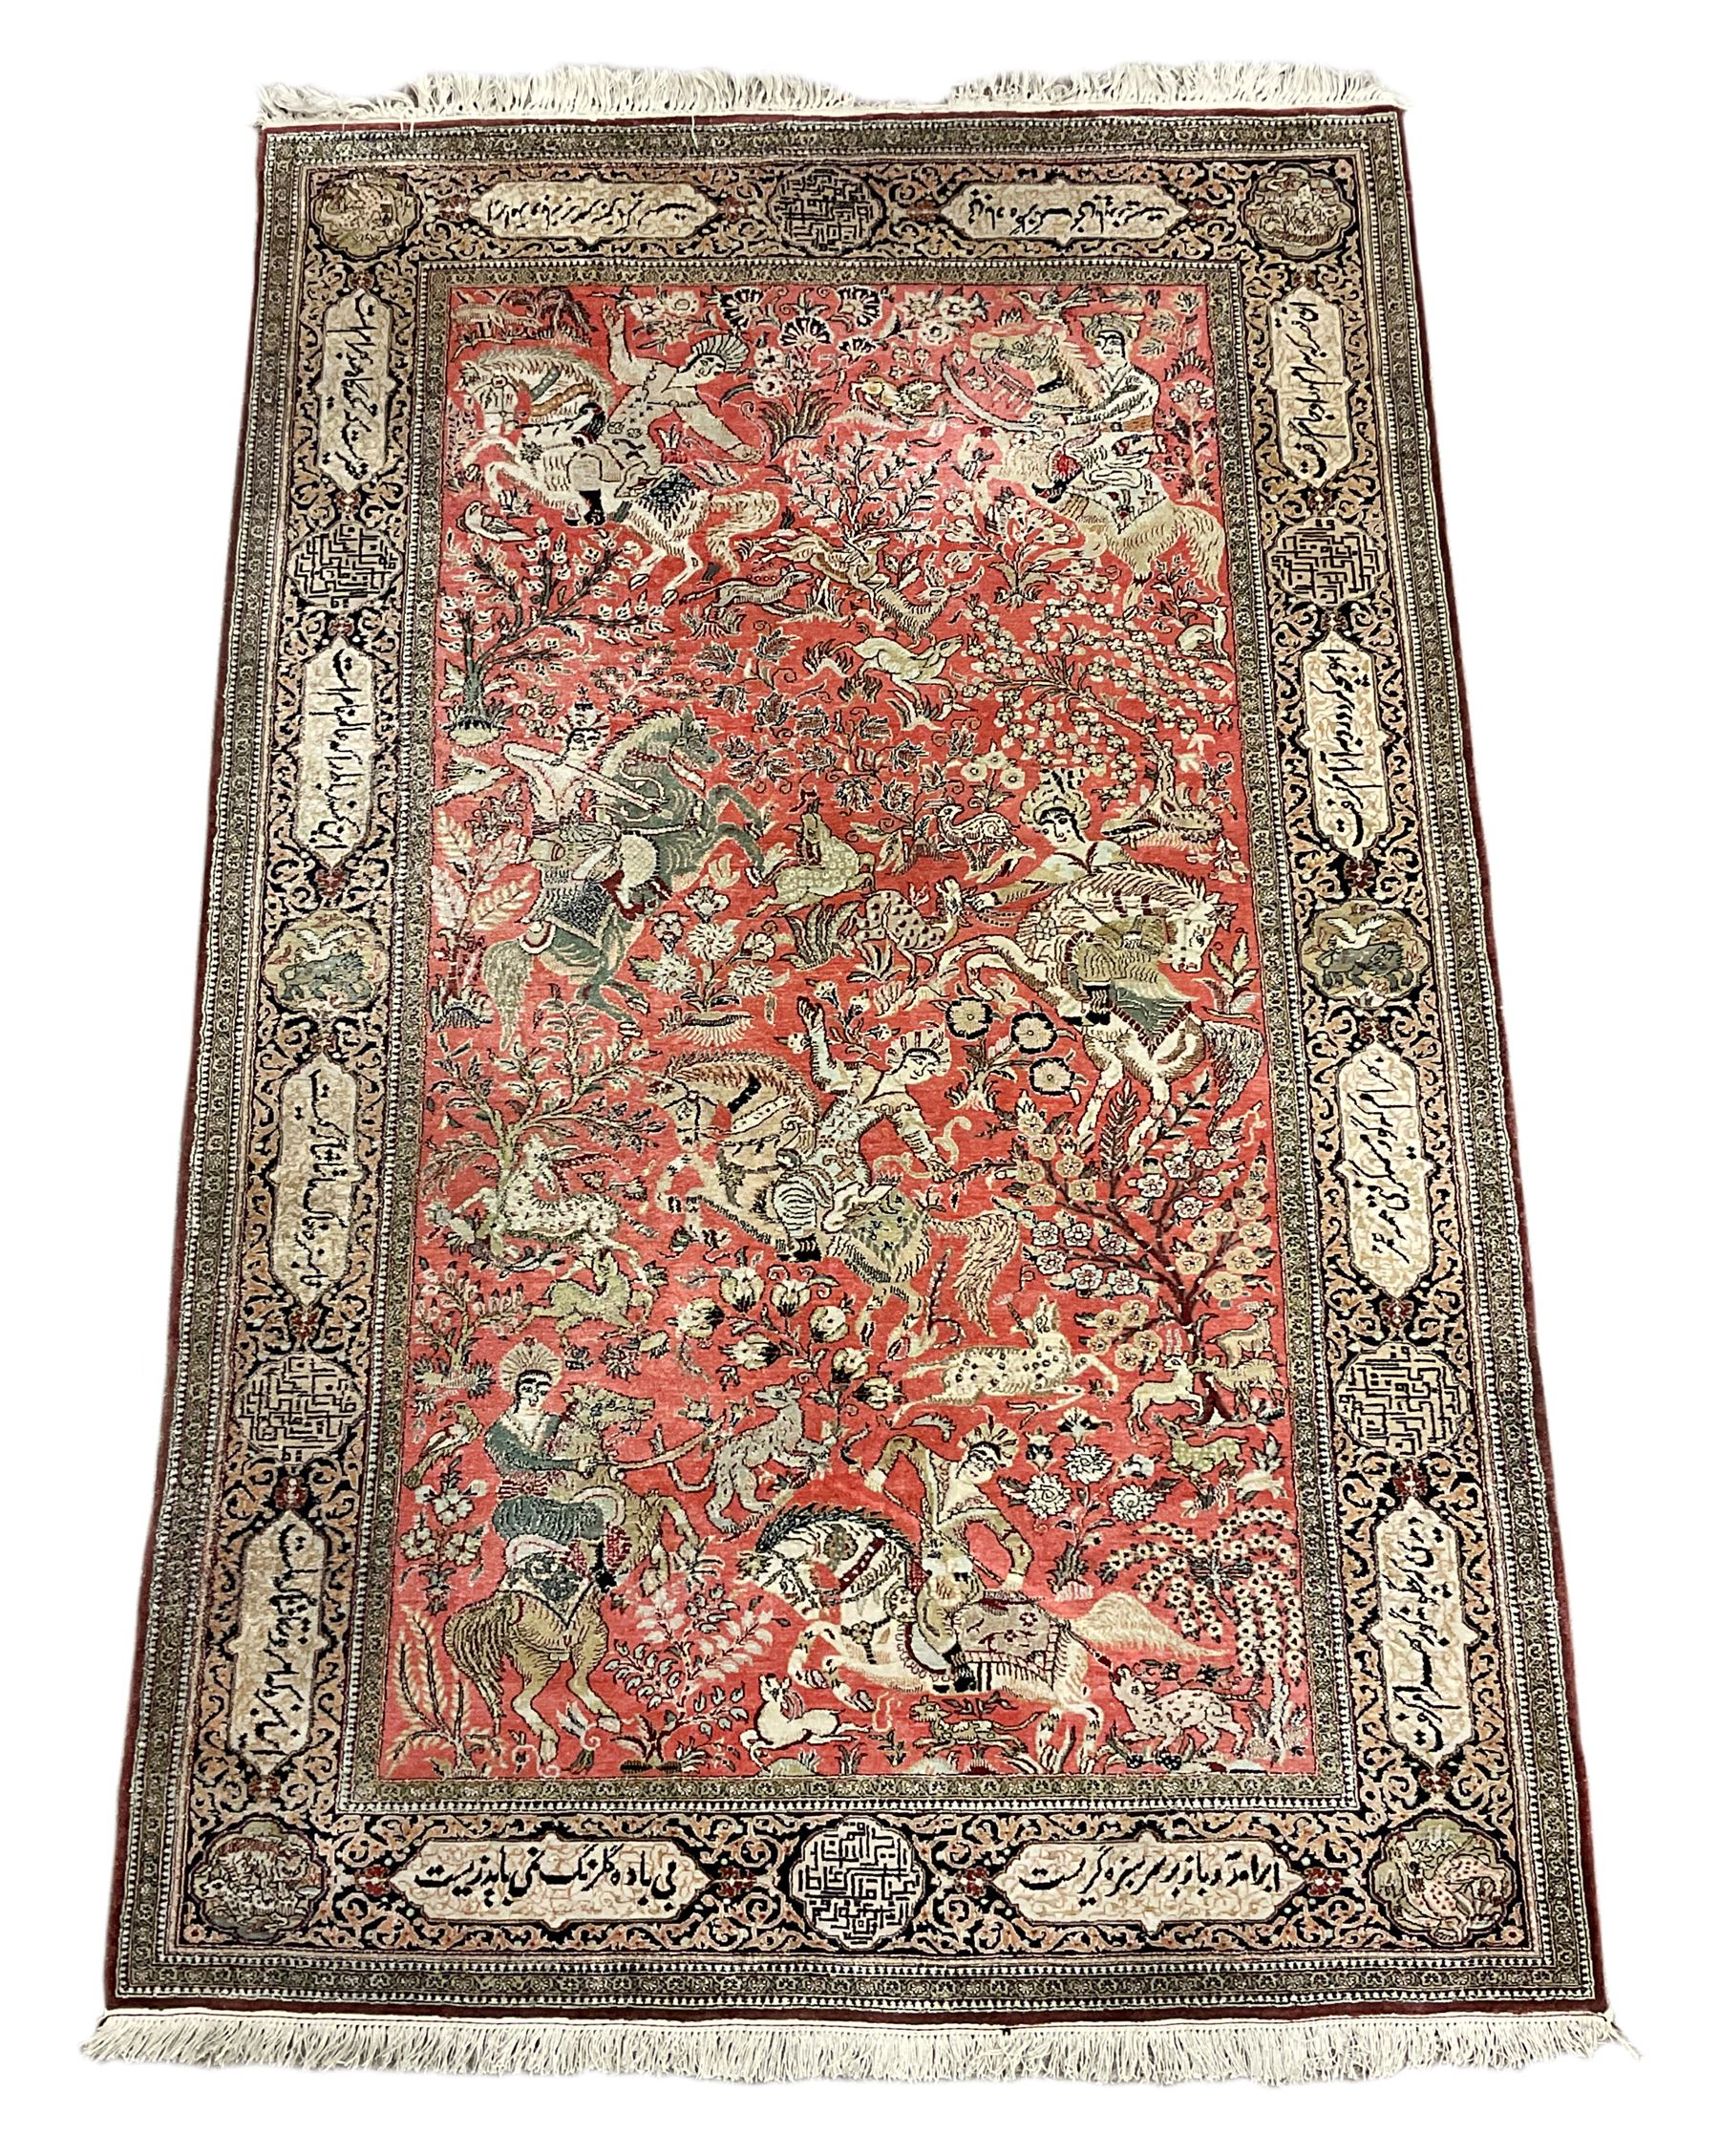 Fine Persian silk and cotton hunting rug